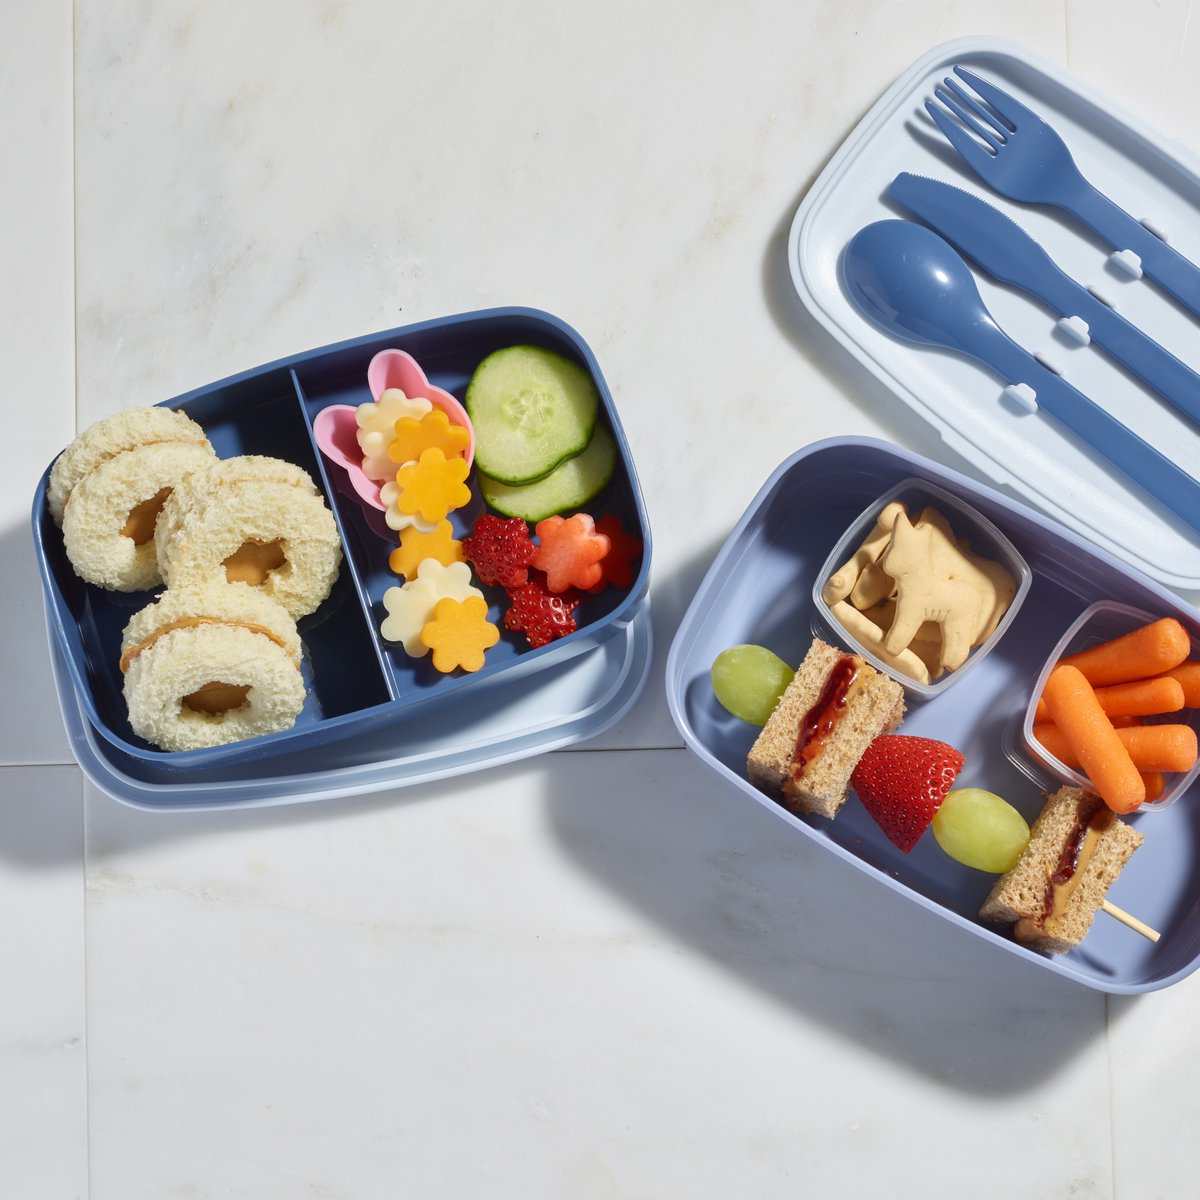 Create lunchtime wins with this delicious peanut butter sandwich bento box! Paired with fresh, crunchy veggies for a well-rounded meal on-the-go. Who knew lunch could be this exciting? 🙌🥕